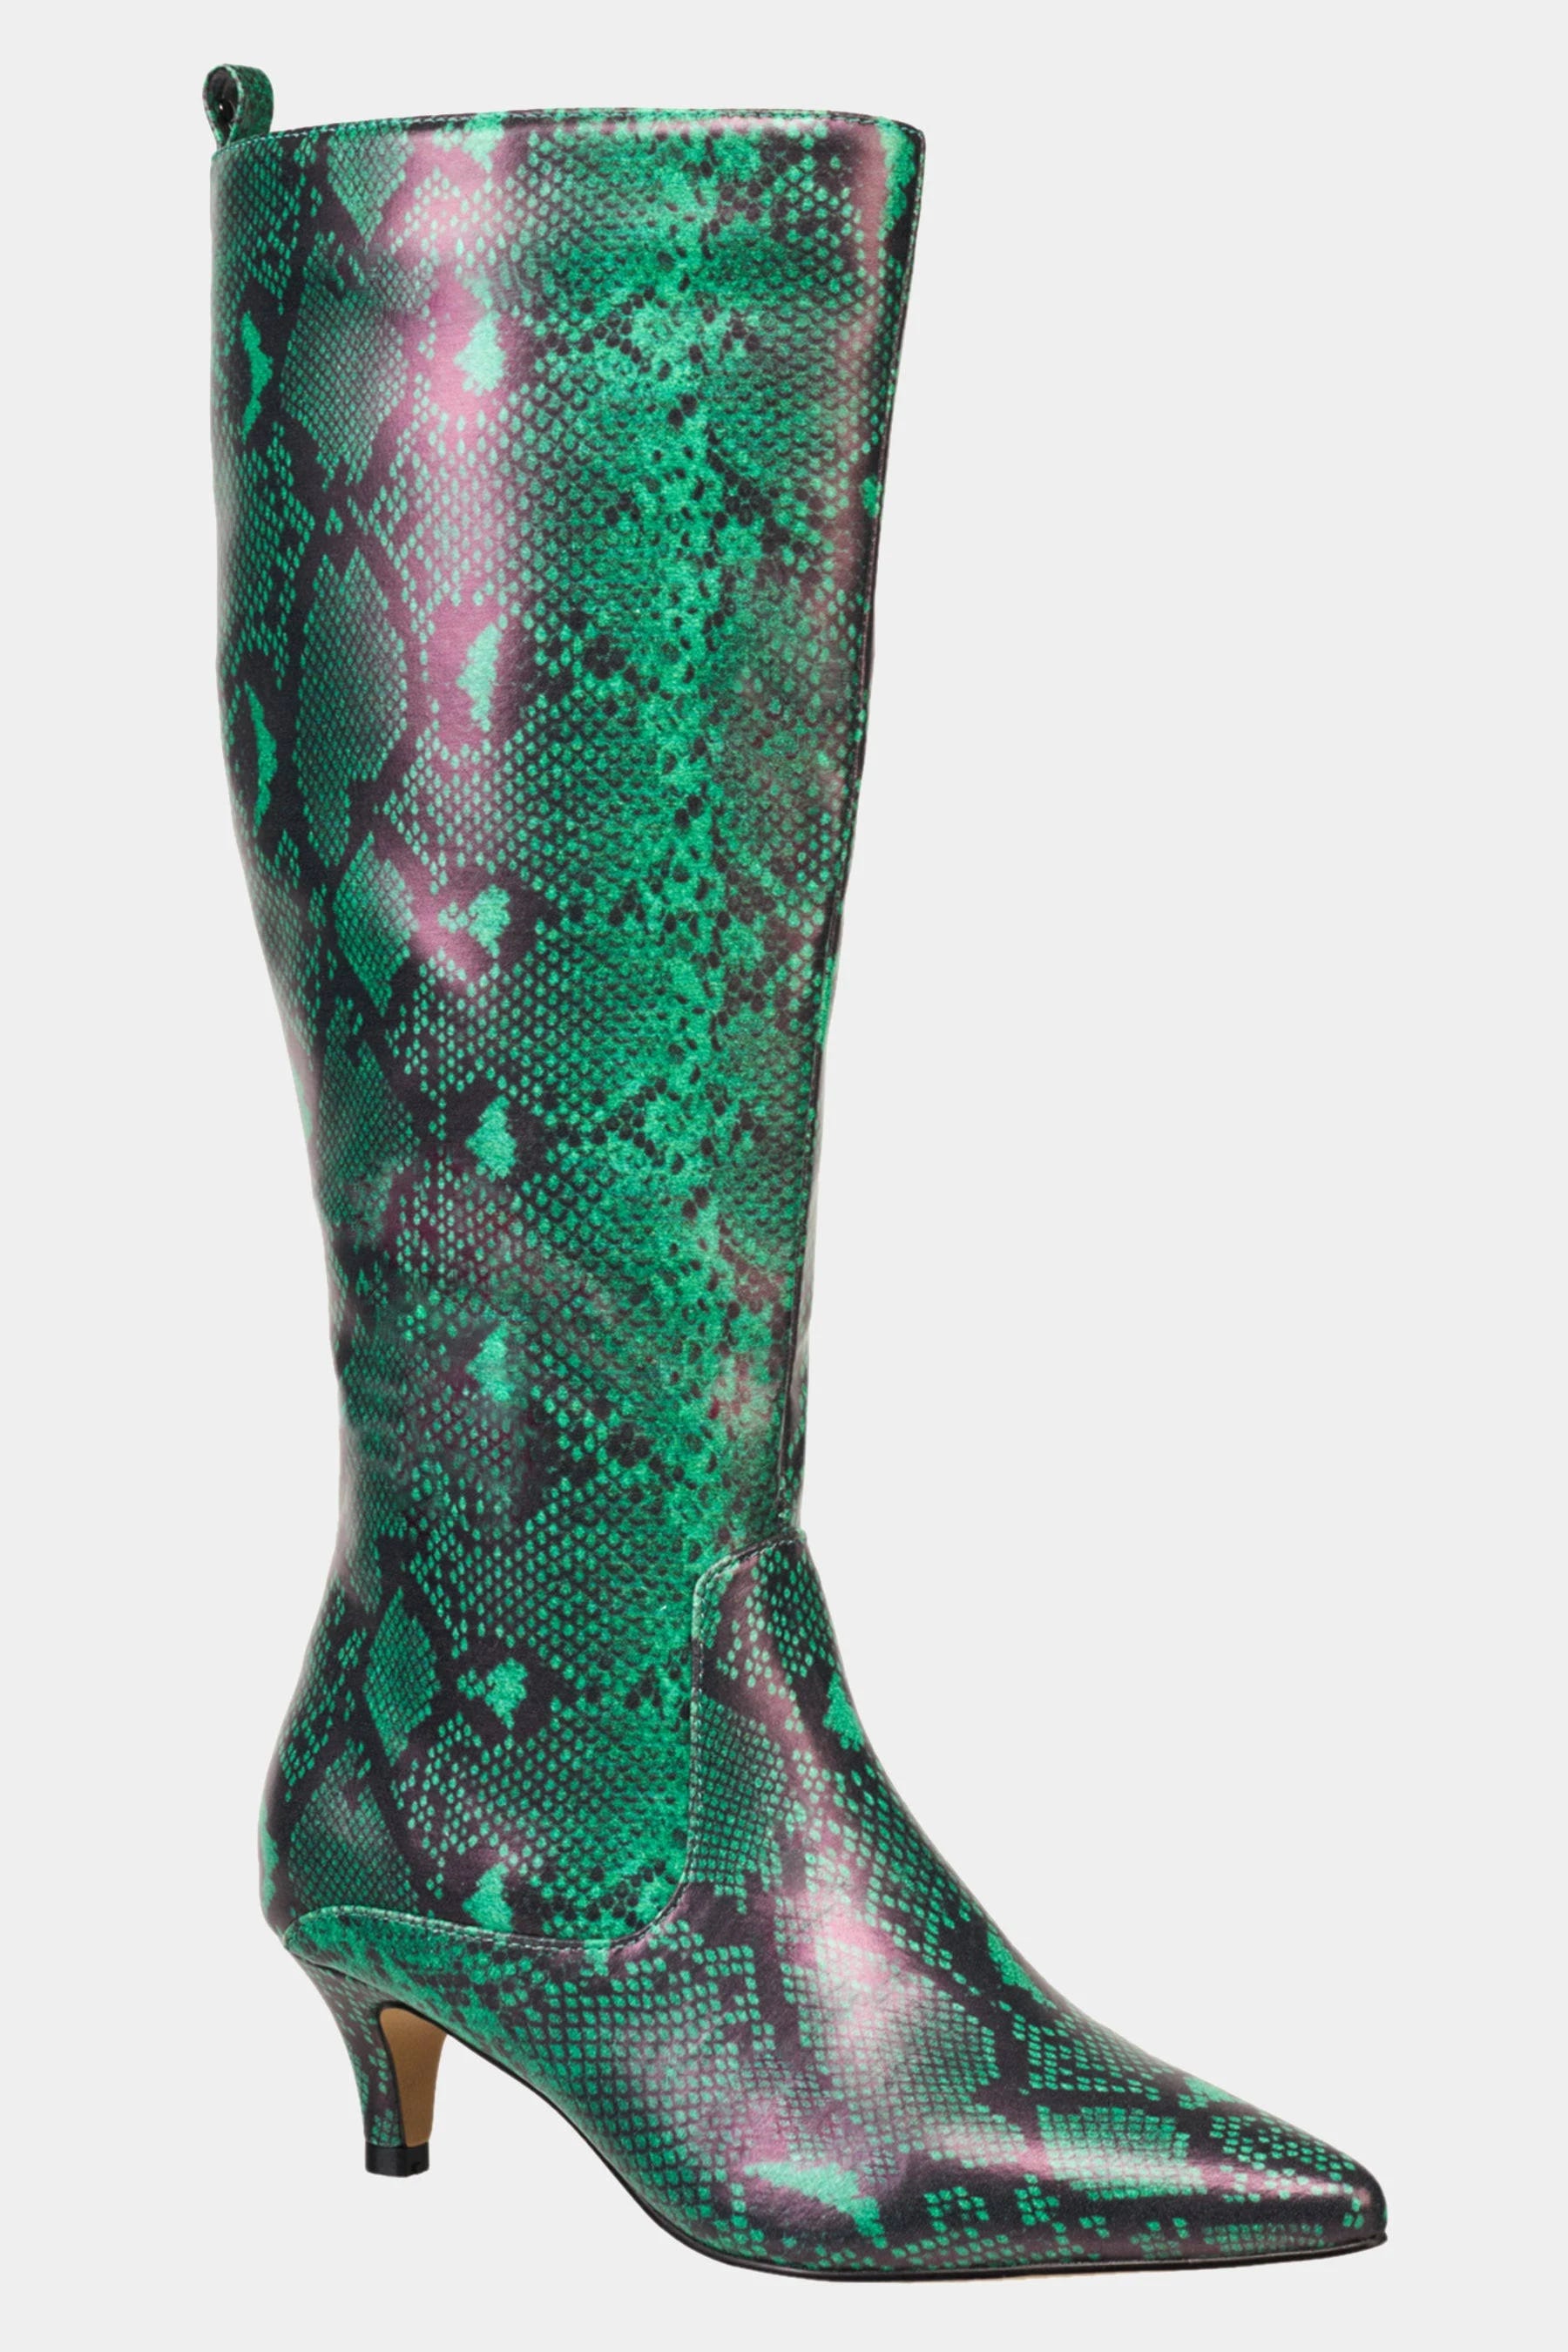 French Connection Darcy Snake Print Pointed Toe Boots - Chic and Comfy | Image